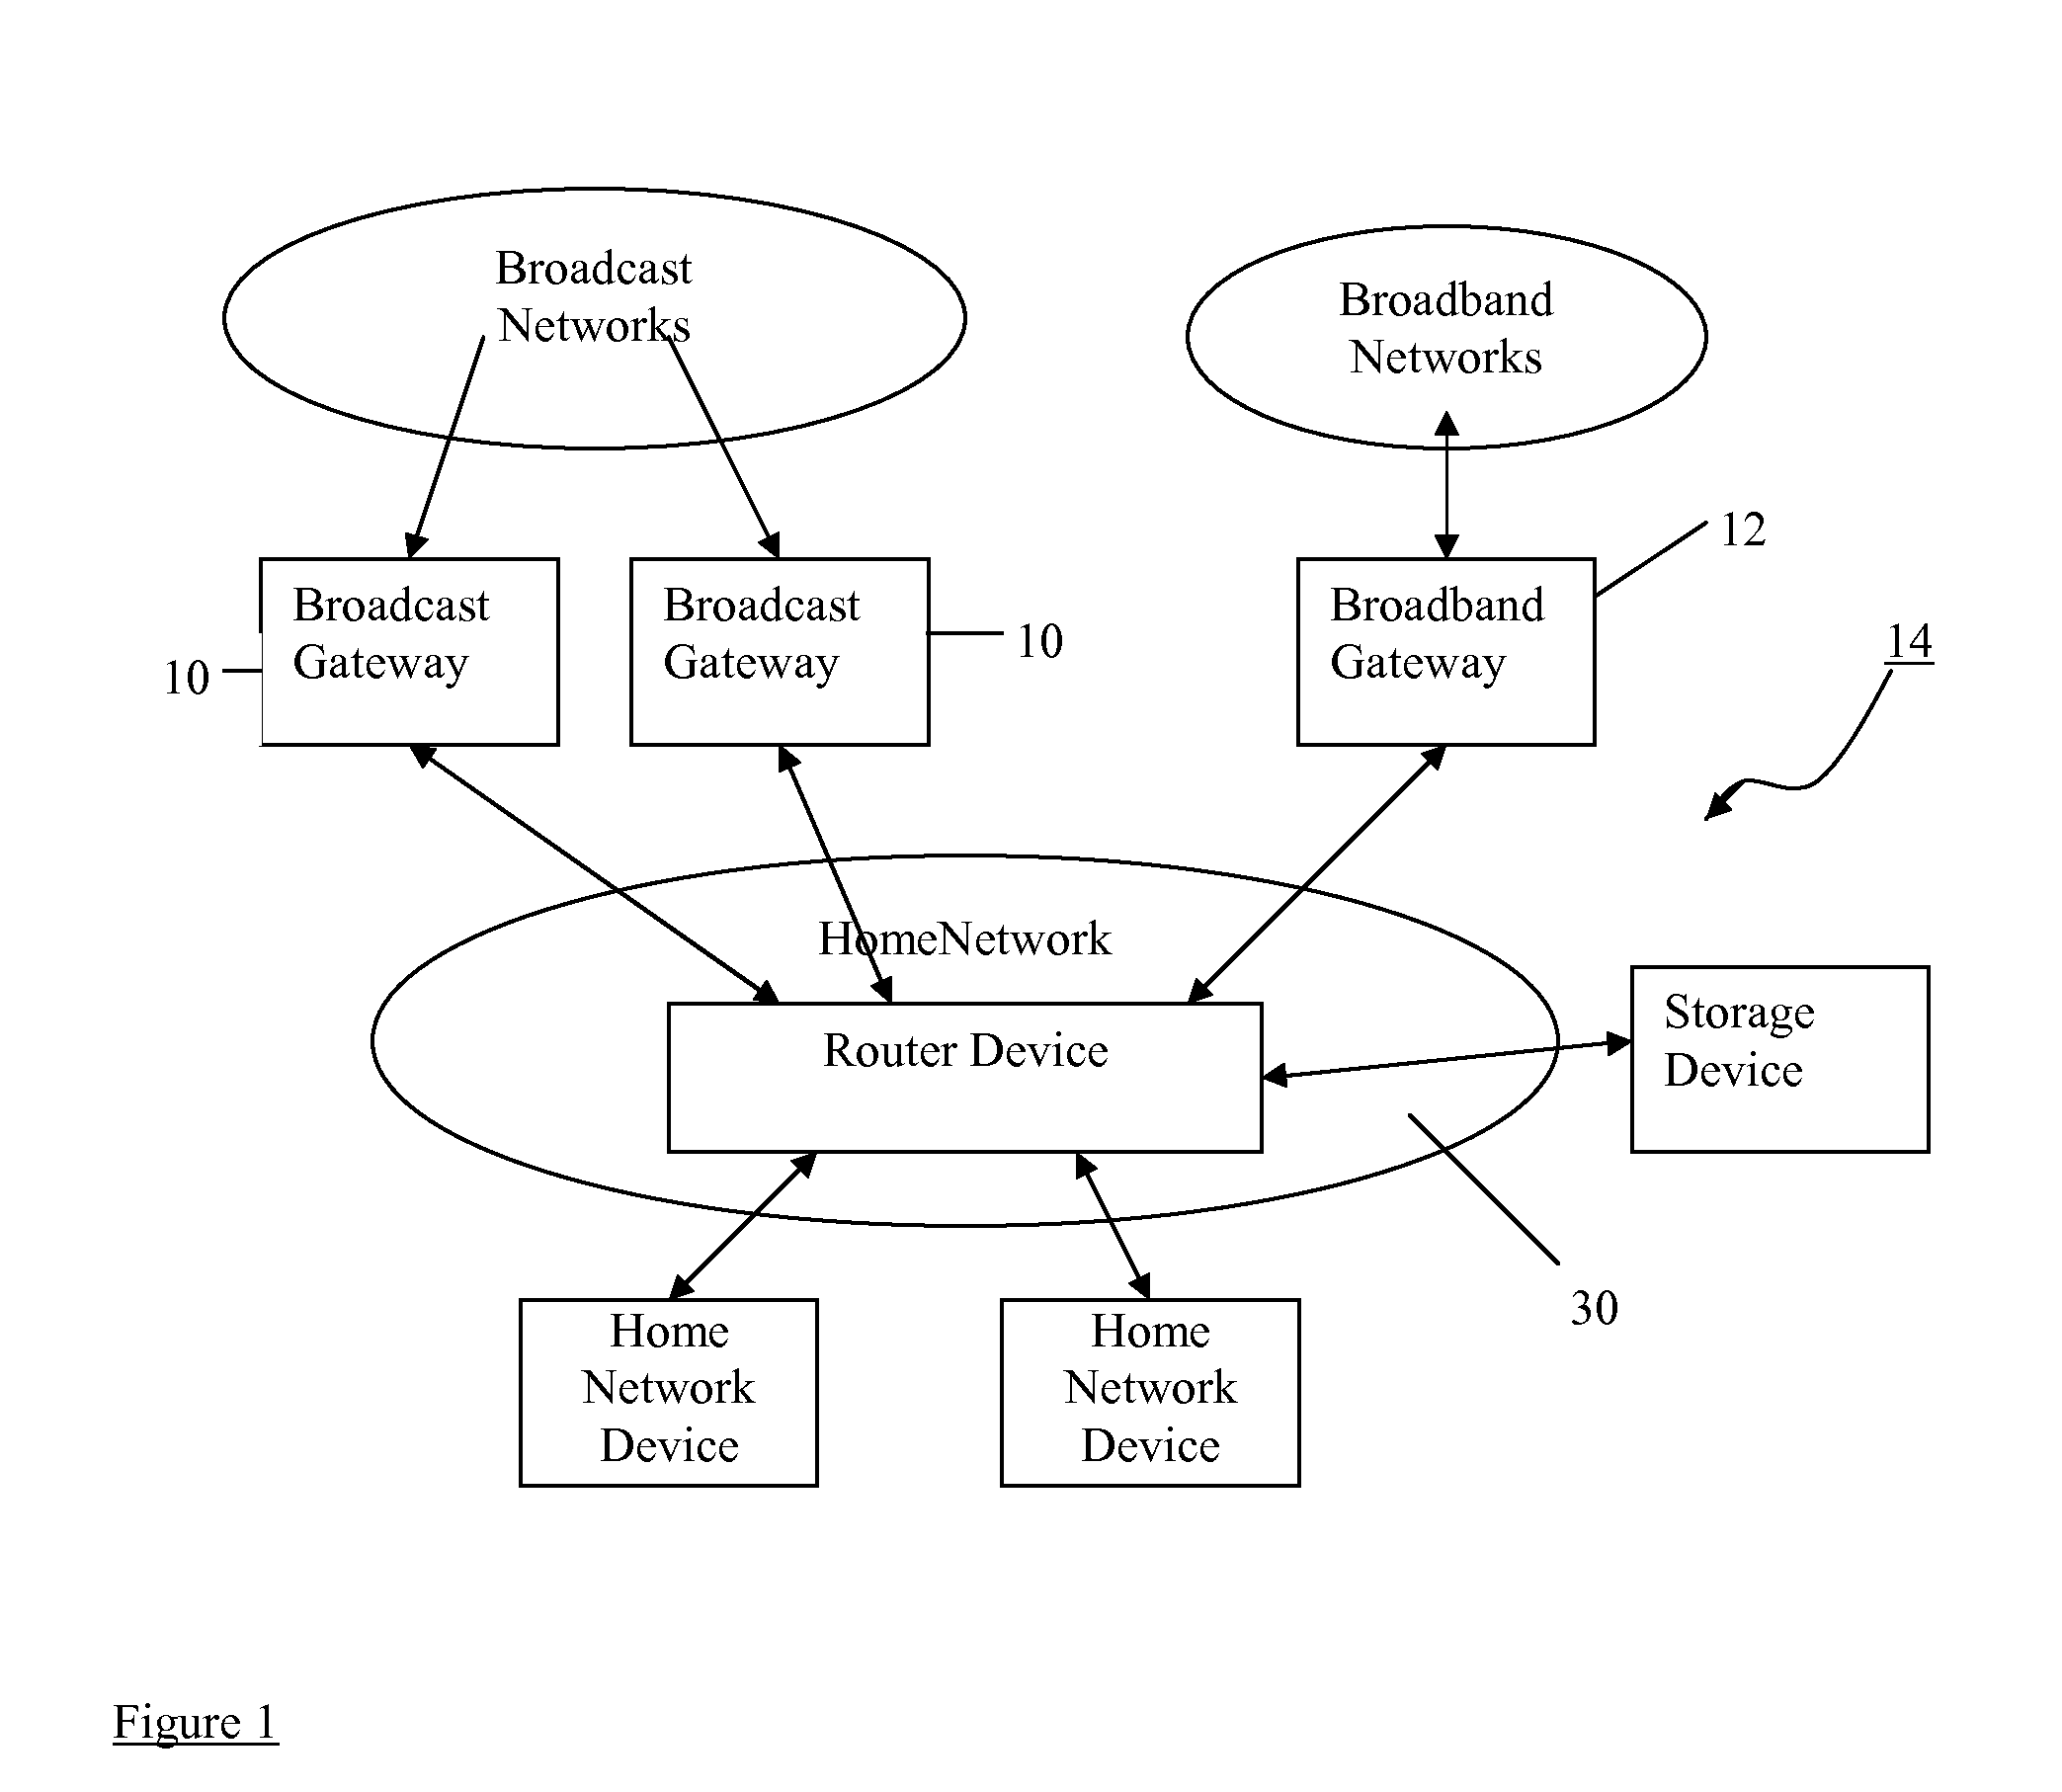 DYNAMIC QoS IN A NETWORK DISTRIBUTING STREAMED CONTENT